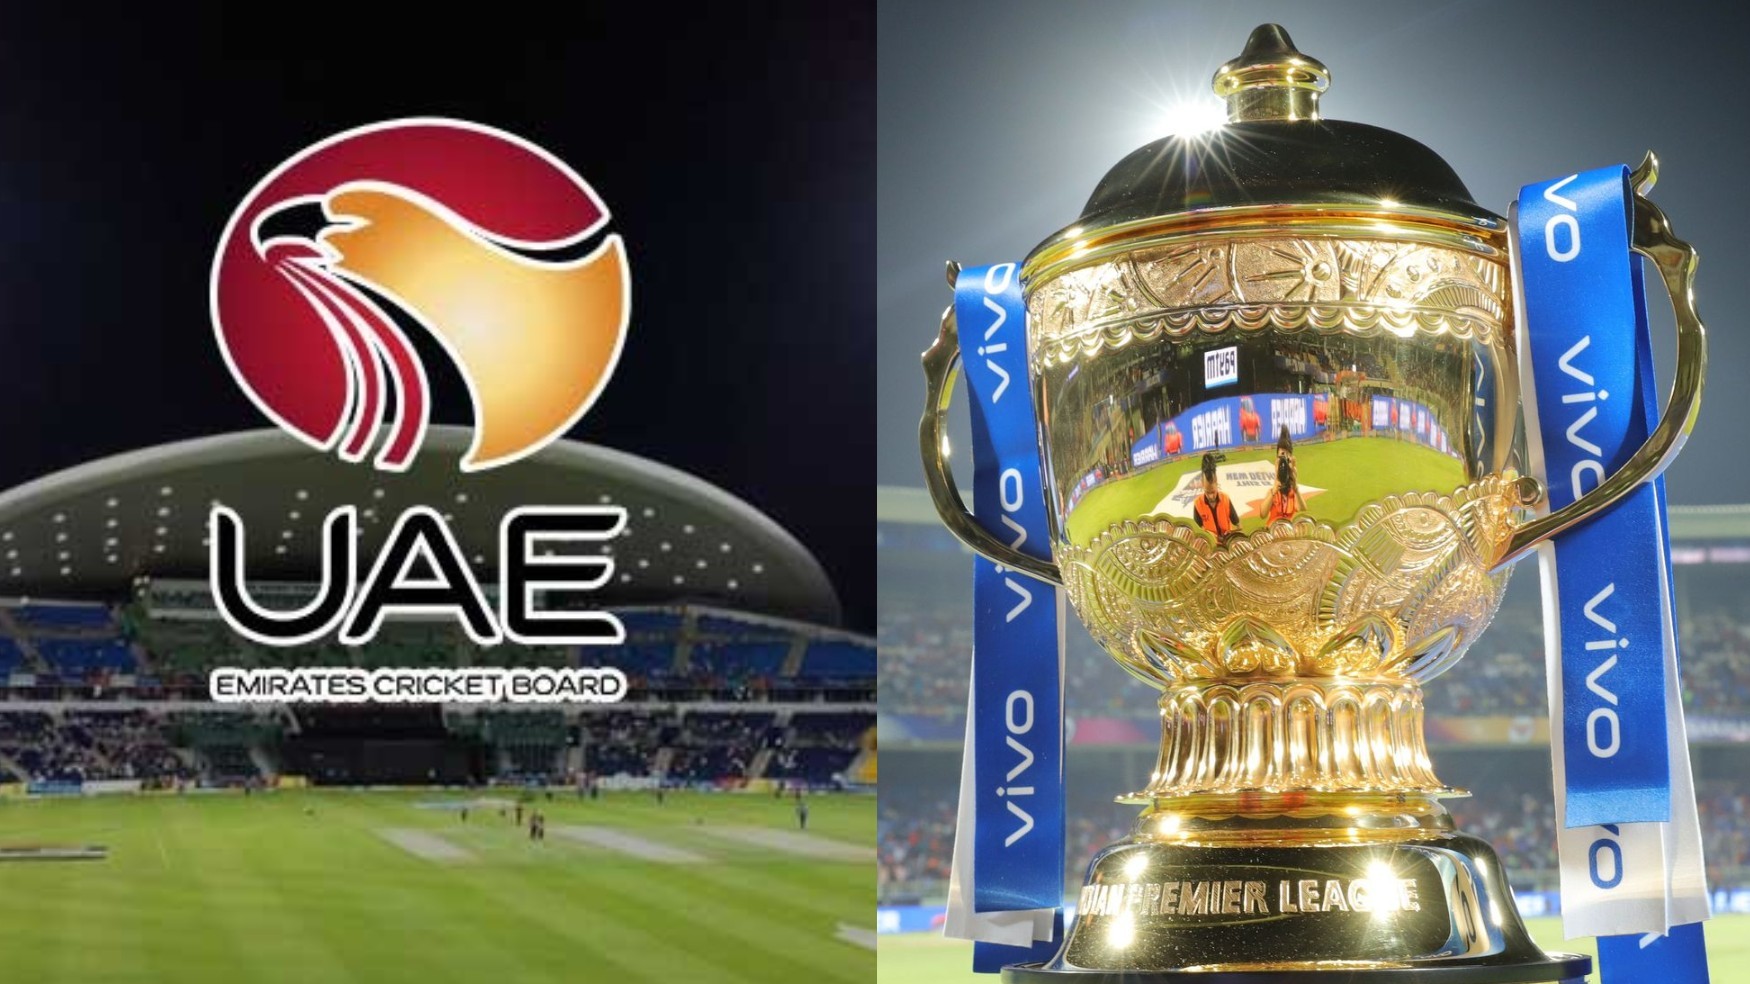 IPL 2020: Emirates Cricket Board confirms receiving official clearance to host IPL 13 in UAE